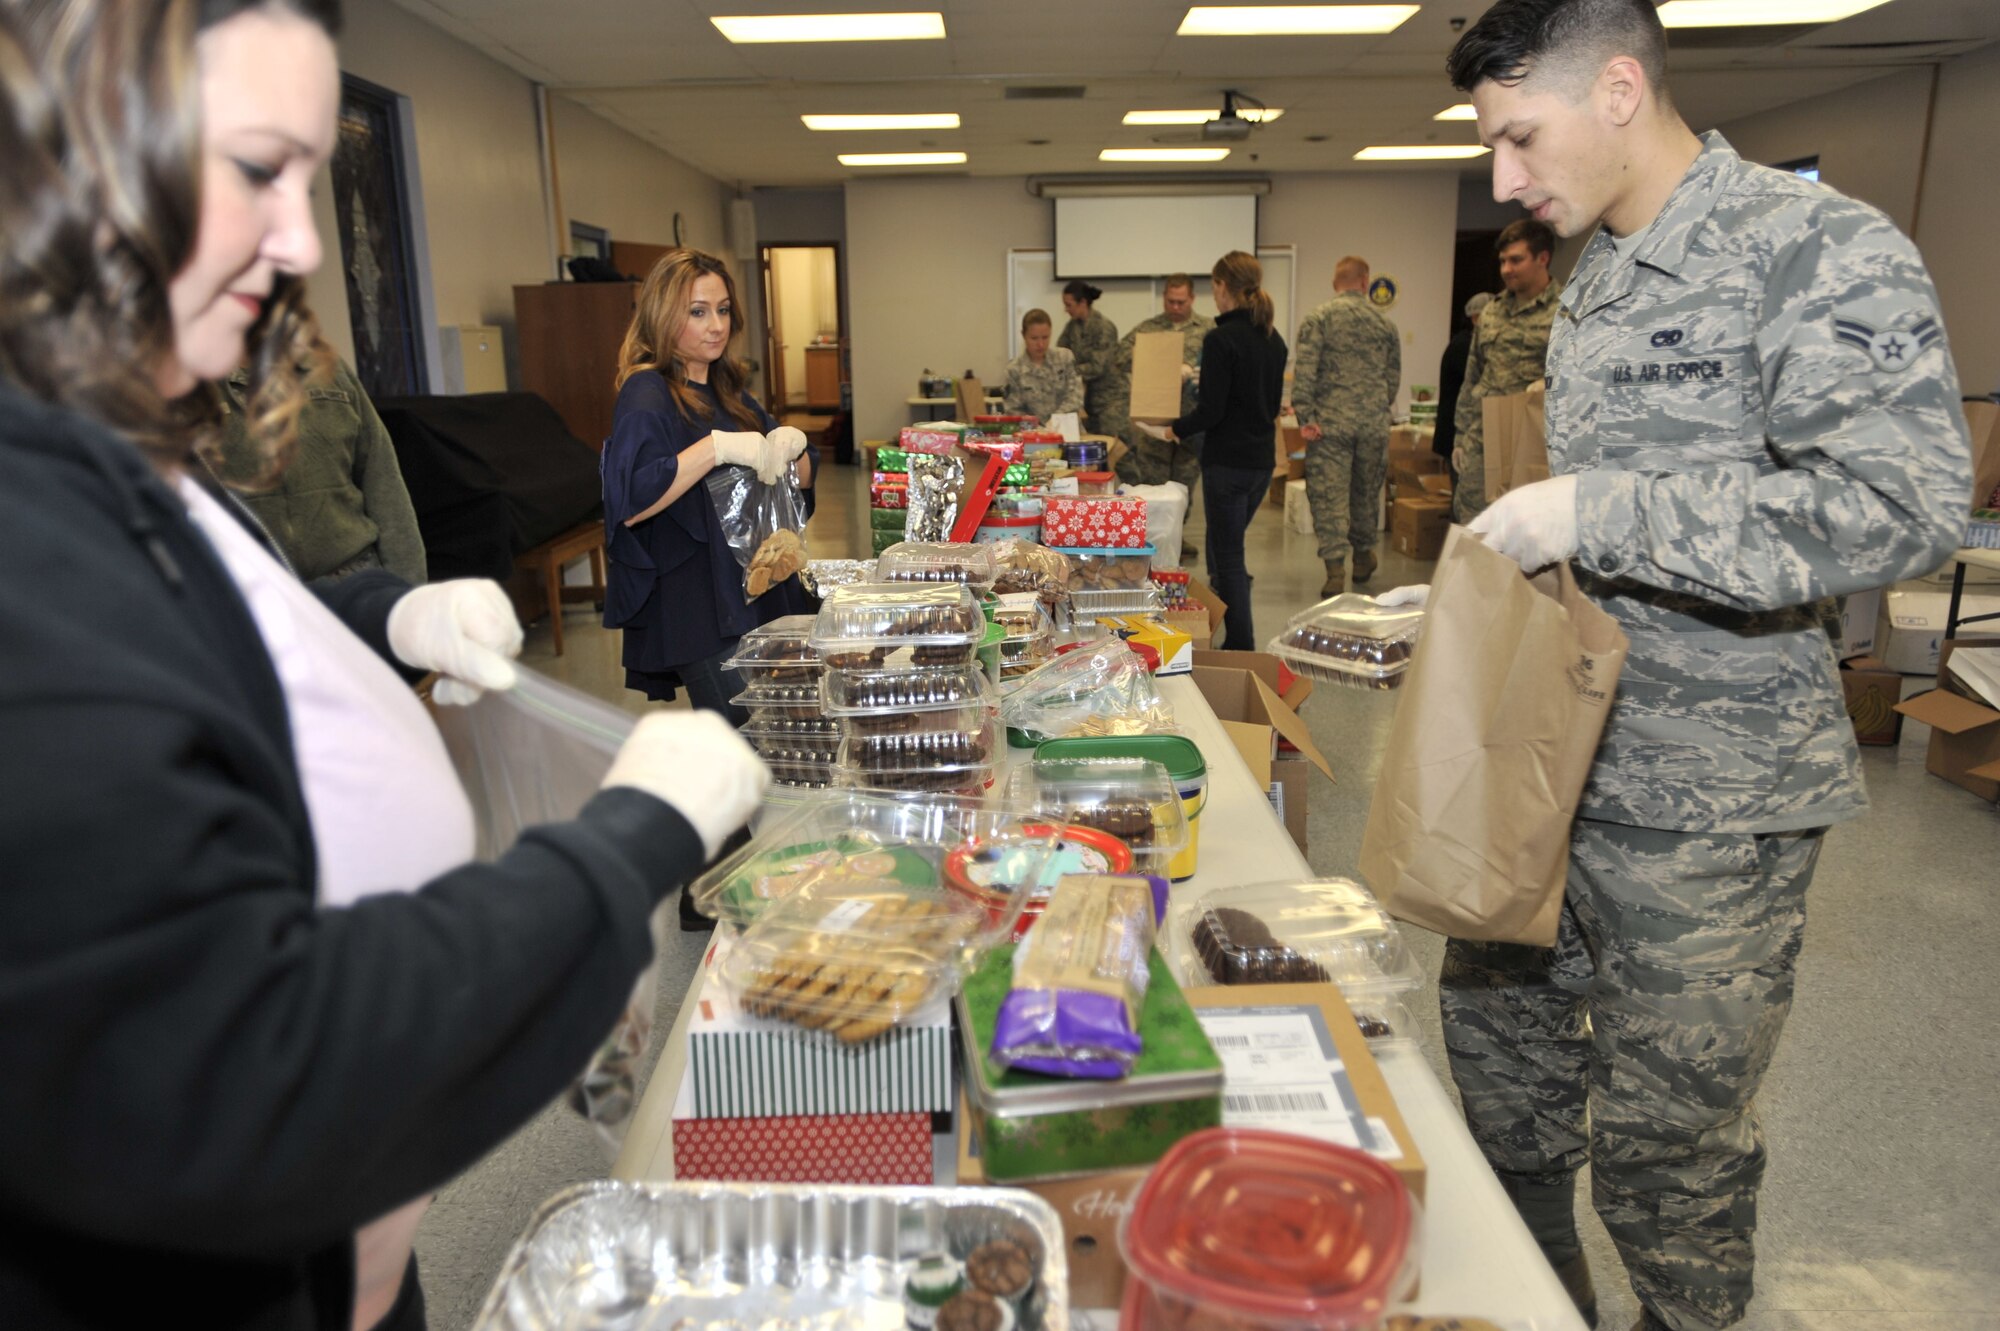 Shower Shaw with Cookies volunteers prepare cookies to be delivered to dorm Airmen during the annual cookie drive at Shaw Air Force Base, S.C., Dec. 7, 2017.